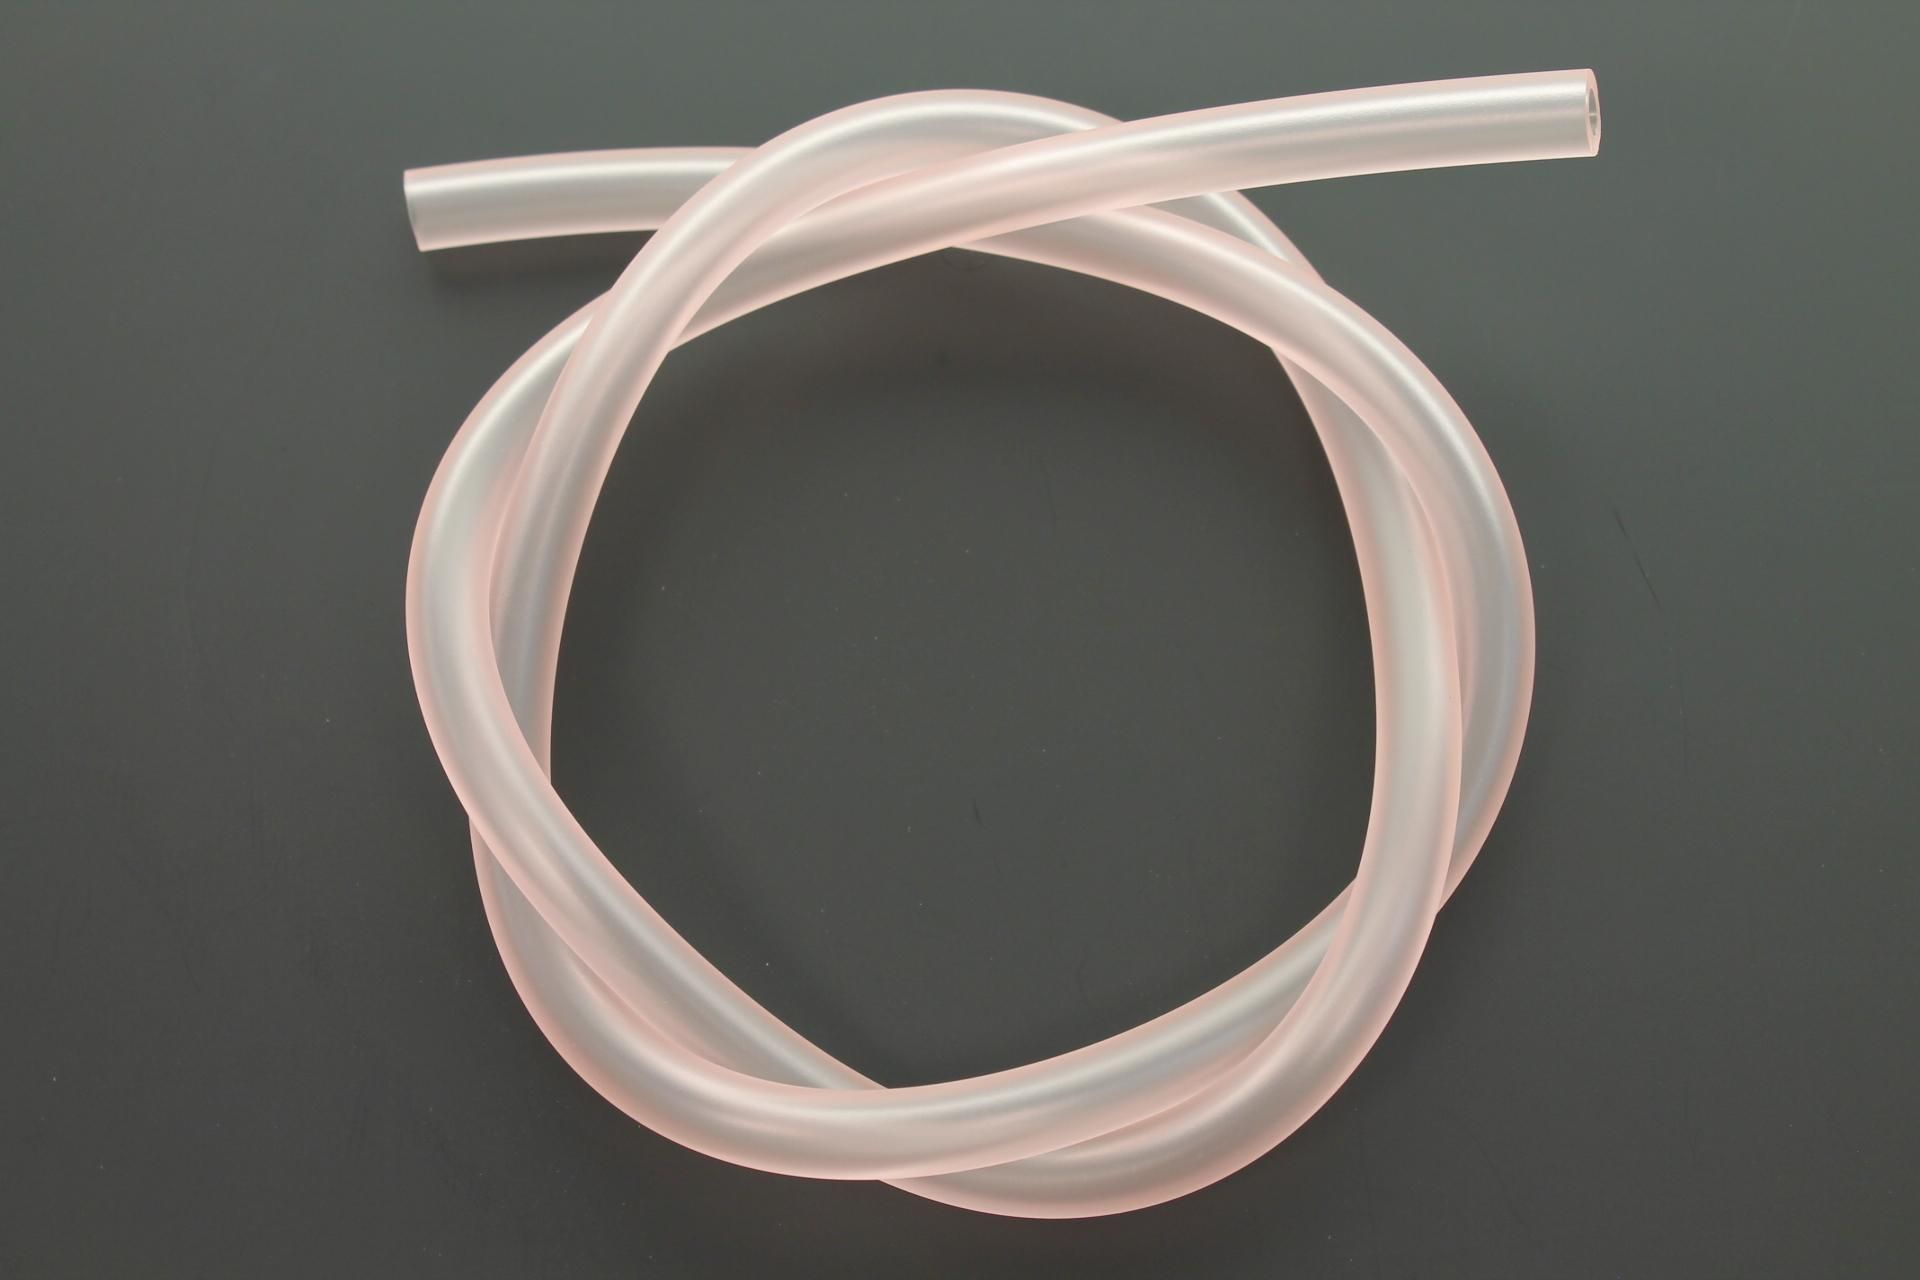 91A20-05042-00 Superseded by 91A20-05080-00 - TUBE, FLEXIBLE